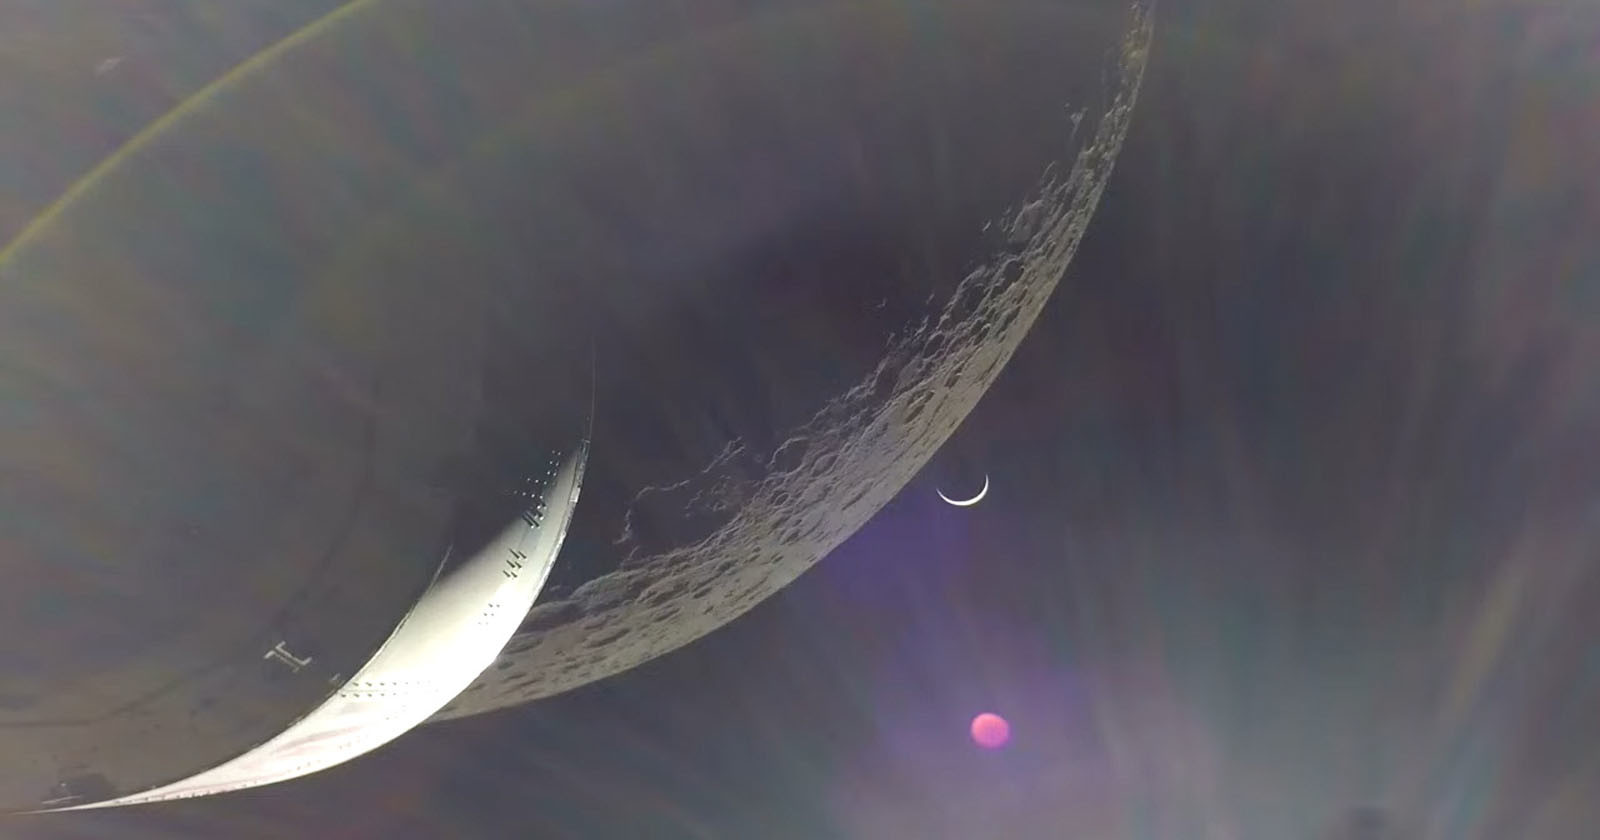 Orion Spacecraft Snaps Close Flyby Photo of the Moon on its Way Home